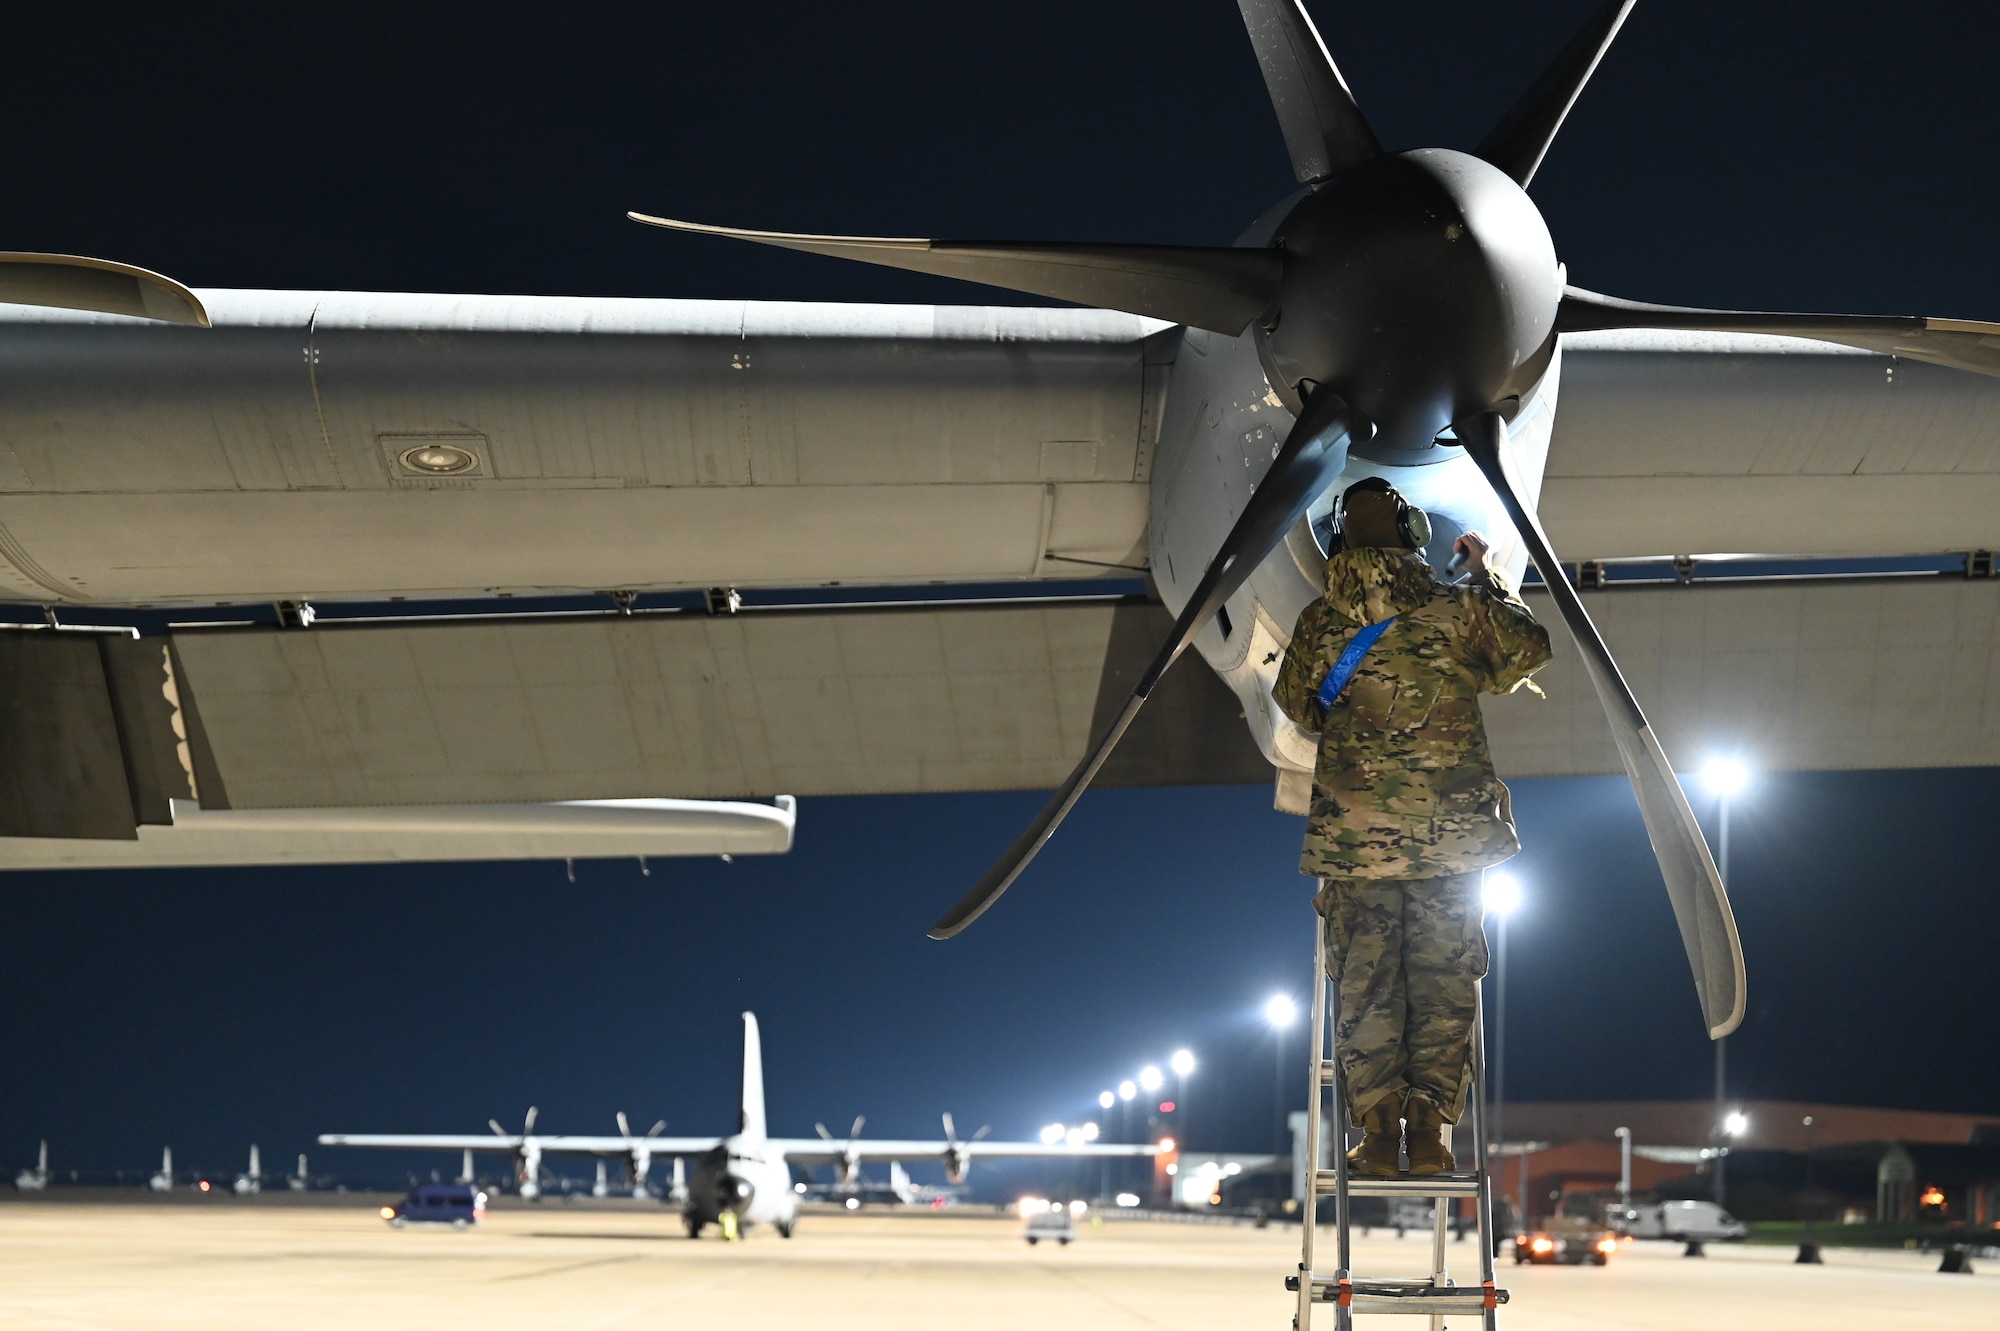 A maintenance airman works on a propeller on a C-130J.